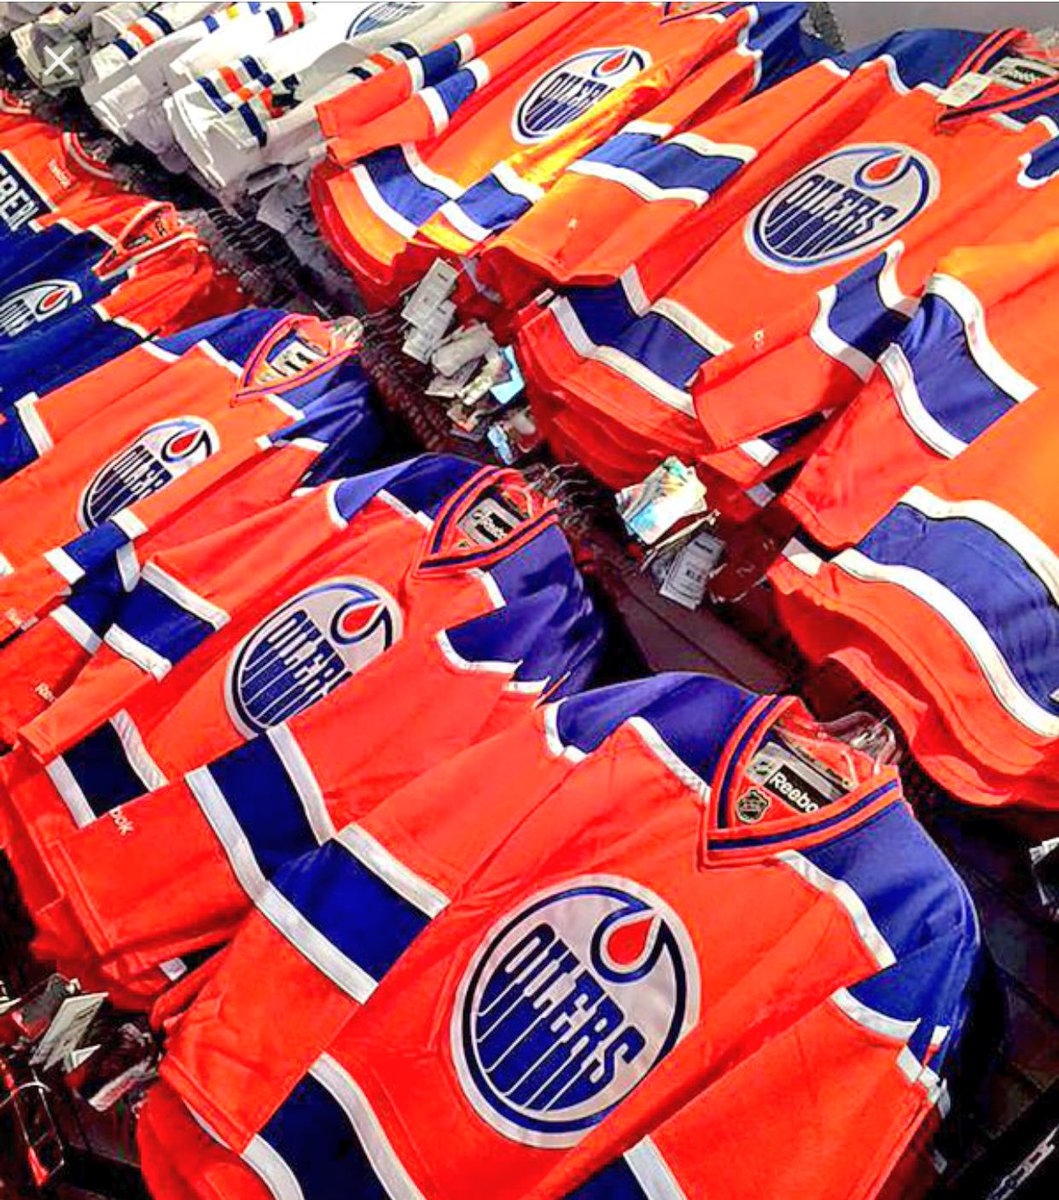 Edmonton Oilers - The #Oilers Store in Kingsway Mall will